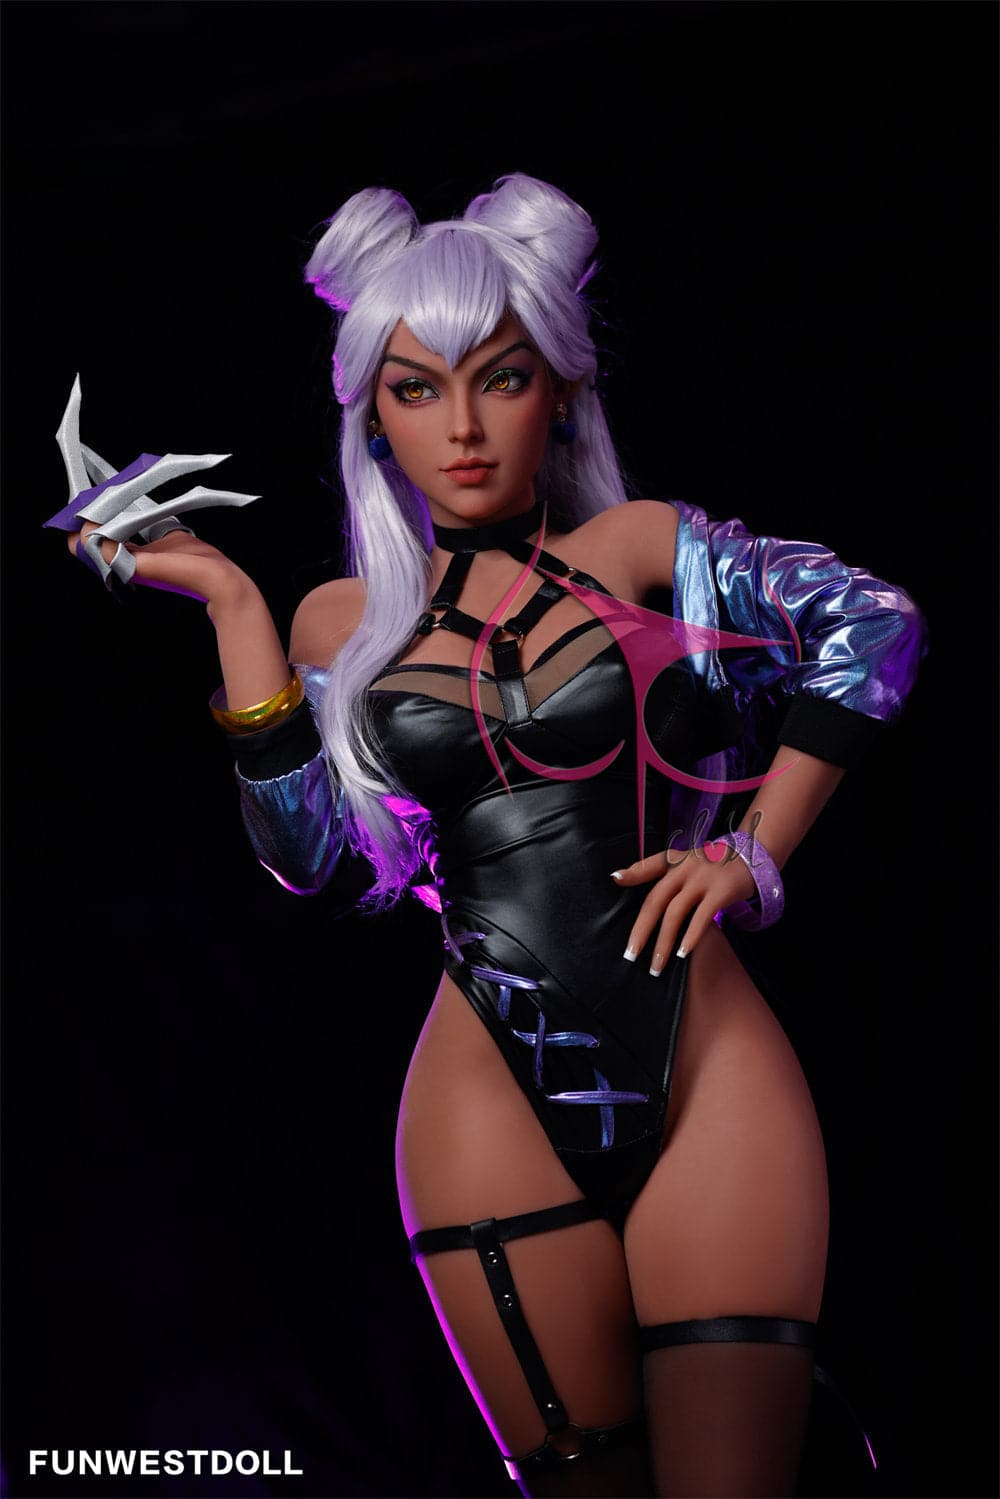 US In Stock - 155cm/5ft1 F-Cup League of Legends Agony’s Embrace Evelynn Sex Doll